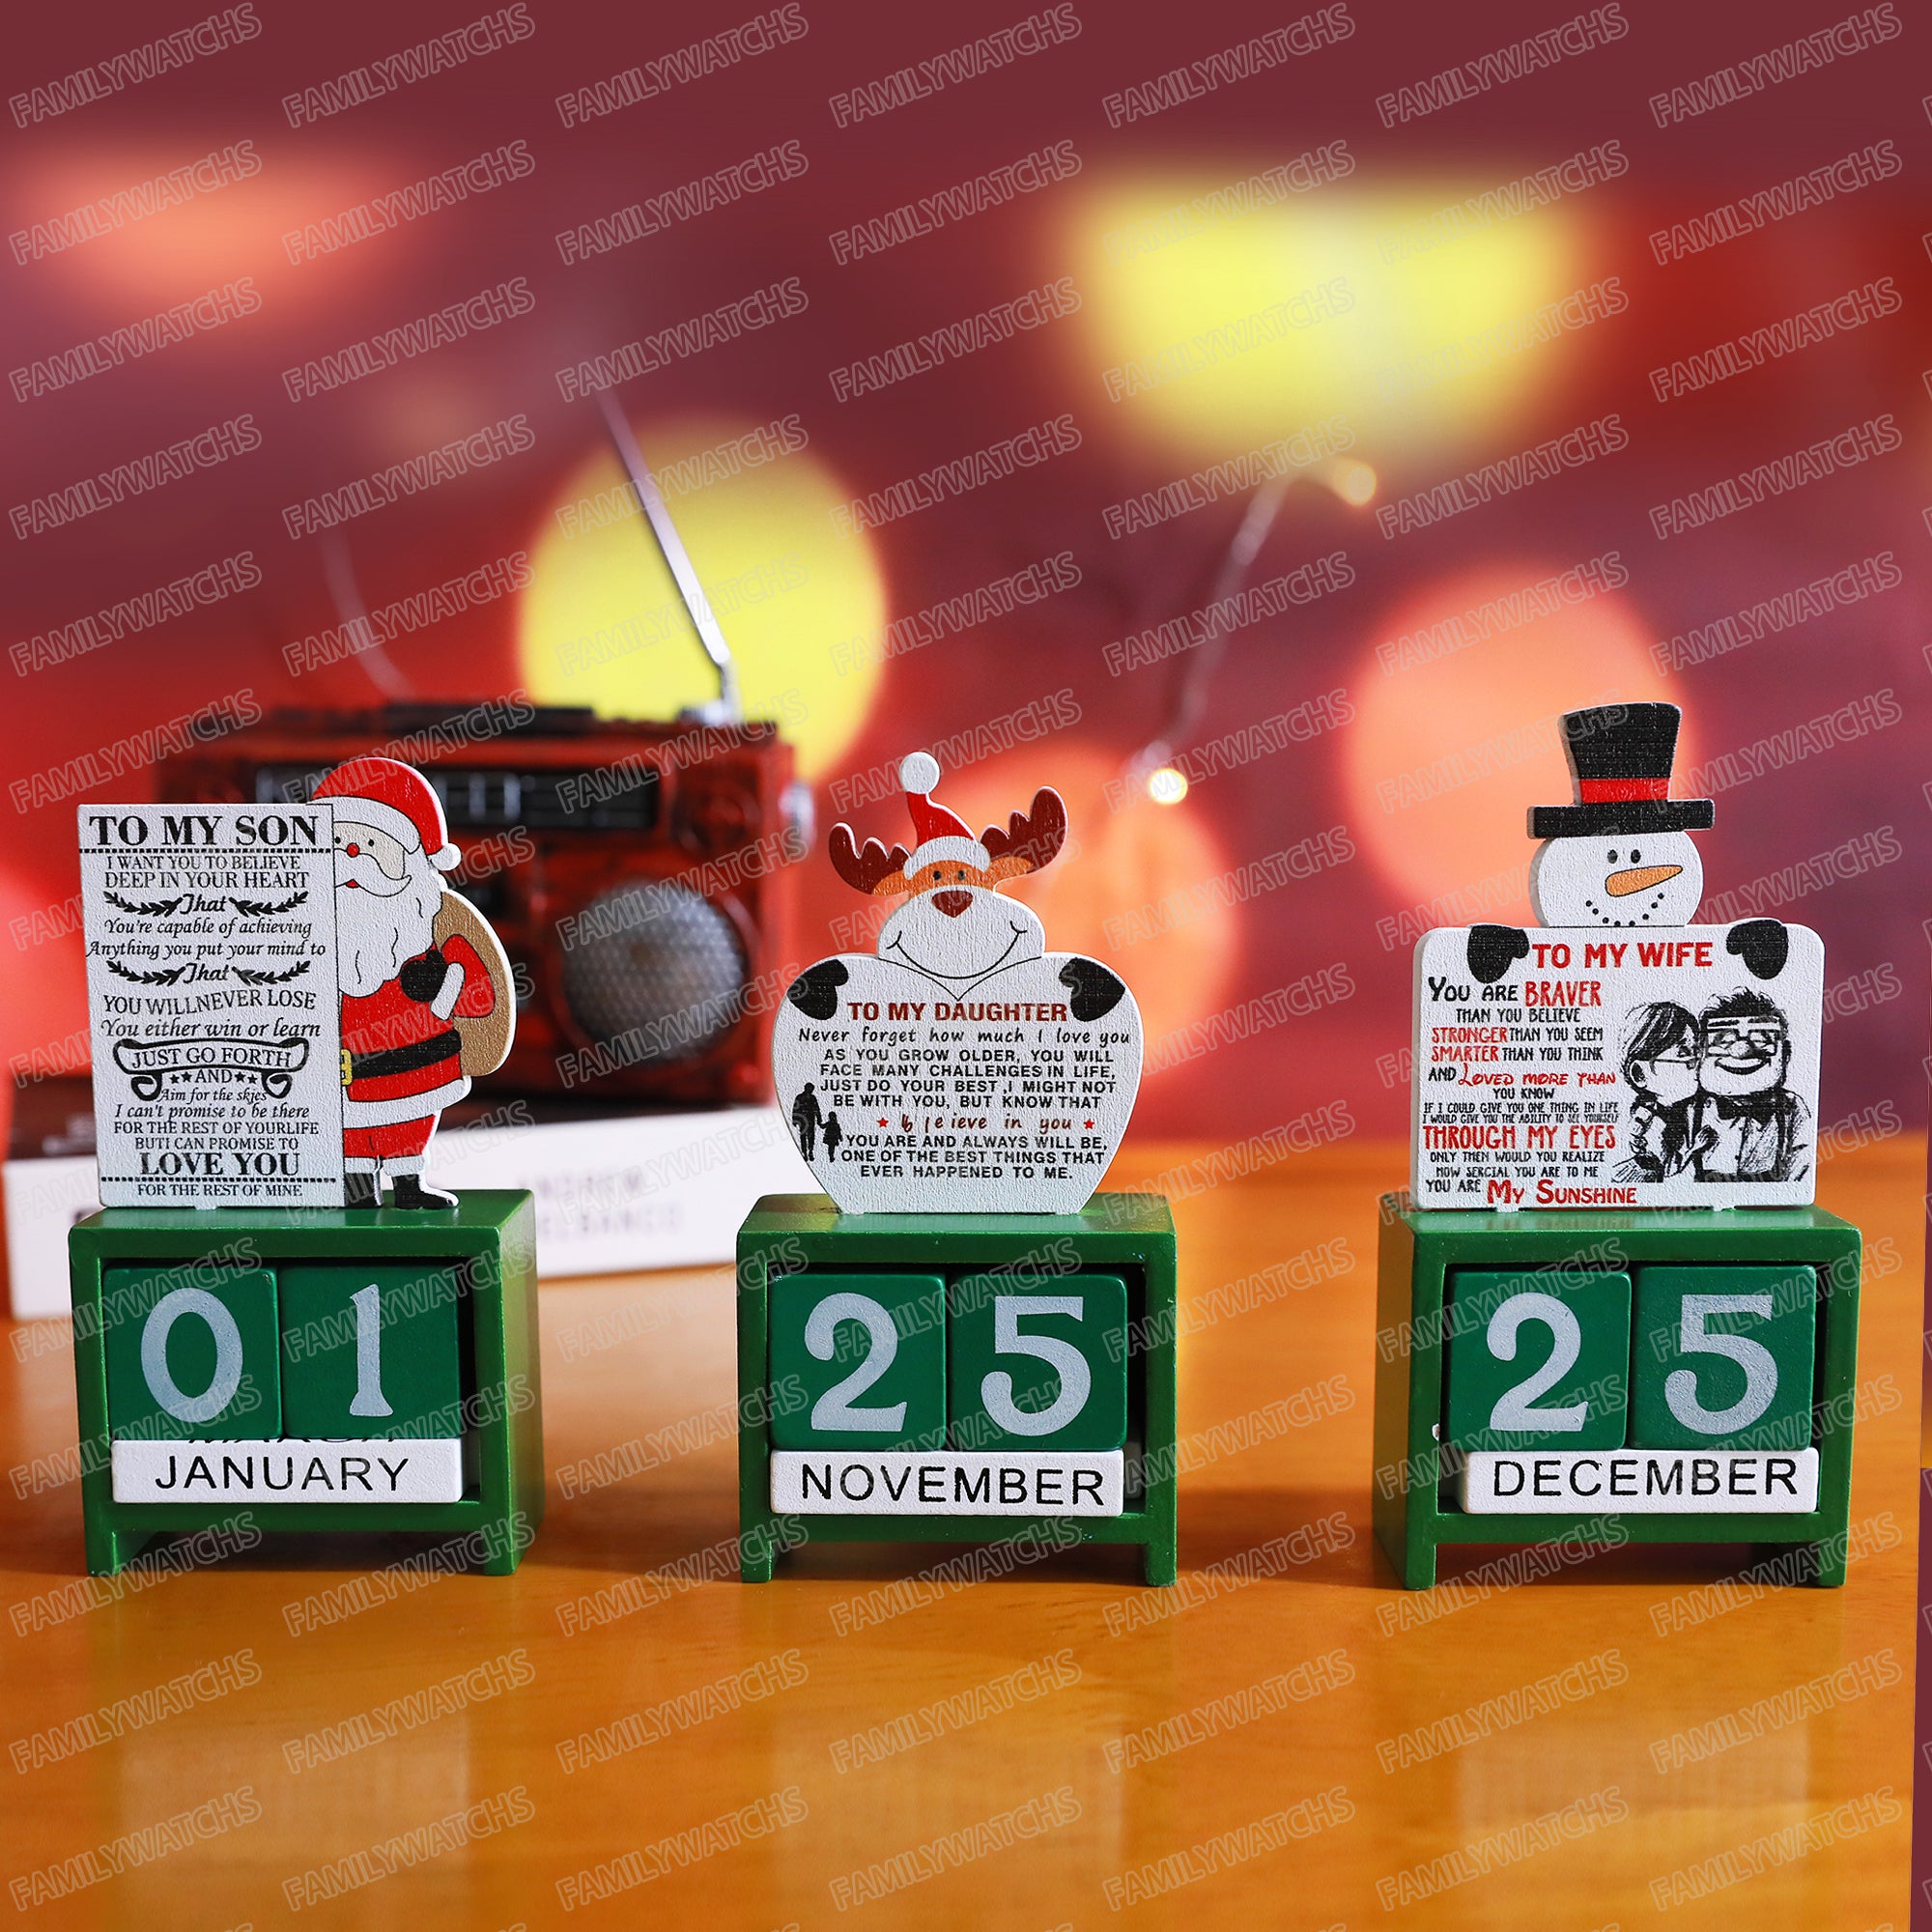 To My Wife - Christmas Advent Countdown Calendar Number Date Wooden Blocks Tabletop Desk Calendar Decoration for Home Office Decoration